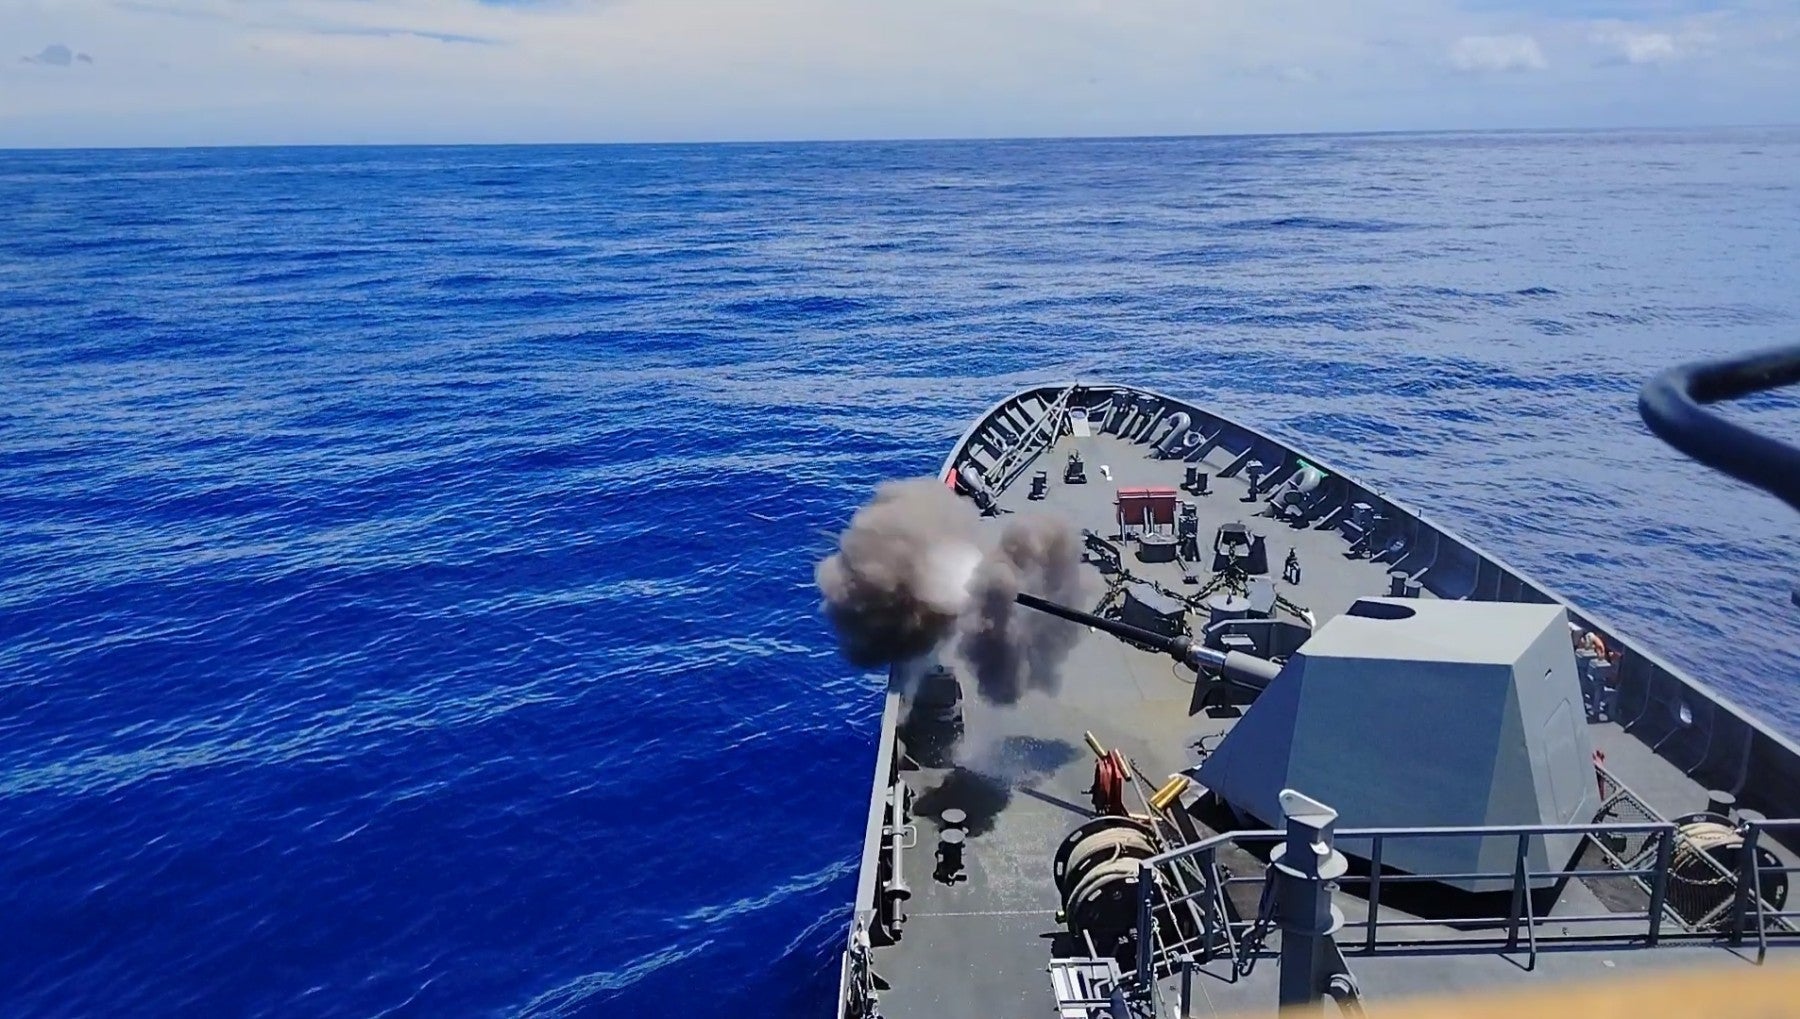 Philippine and Malaysian navies conduct live-fire tests during RIMPAC 2022